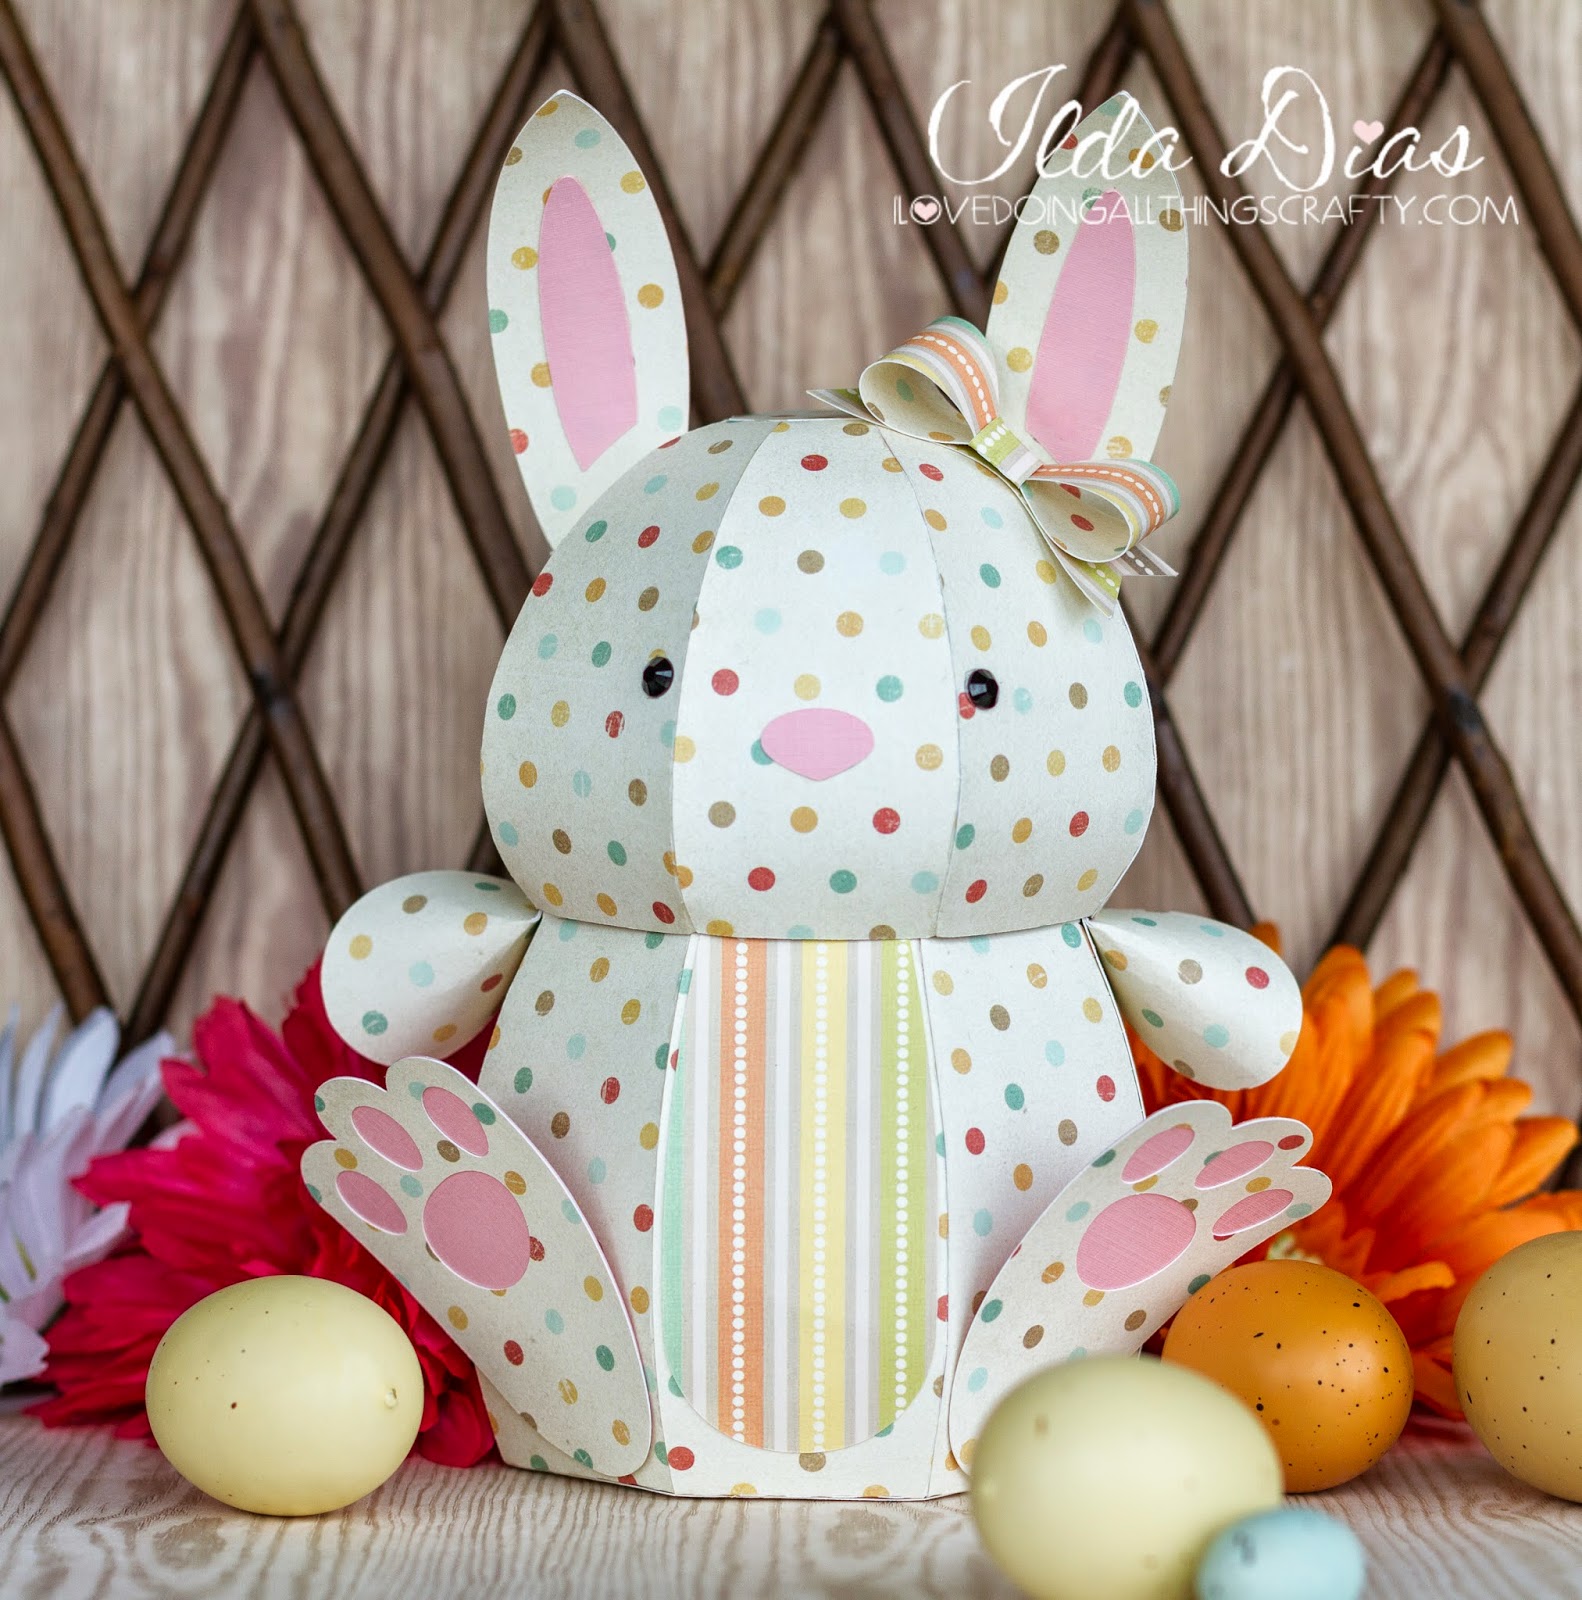 Download I Love Doing All Things Crafty: 3D Paper Easter Bunny